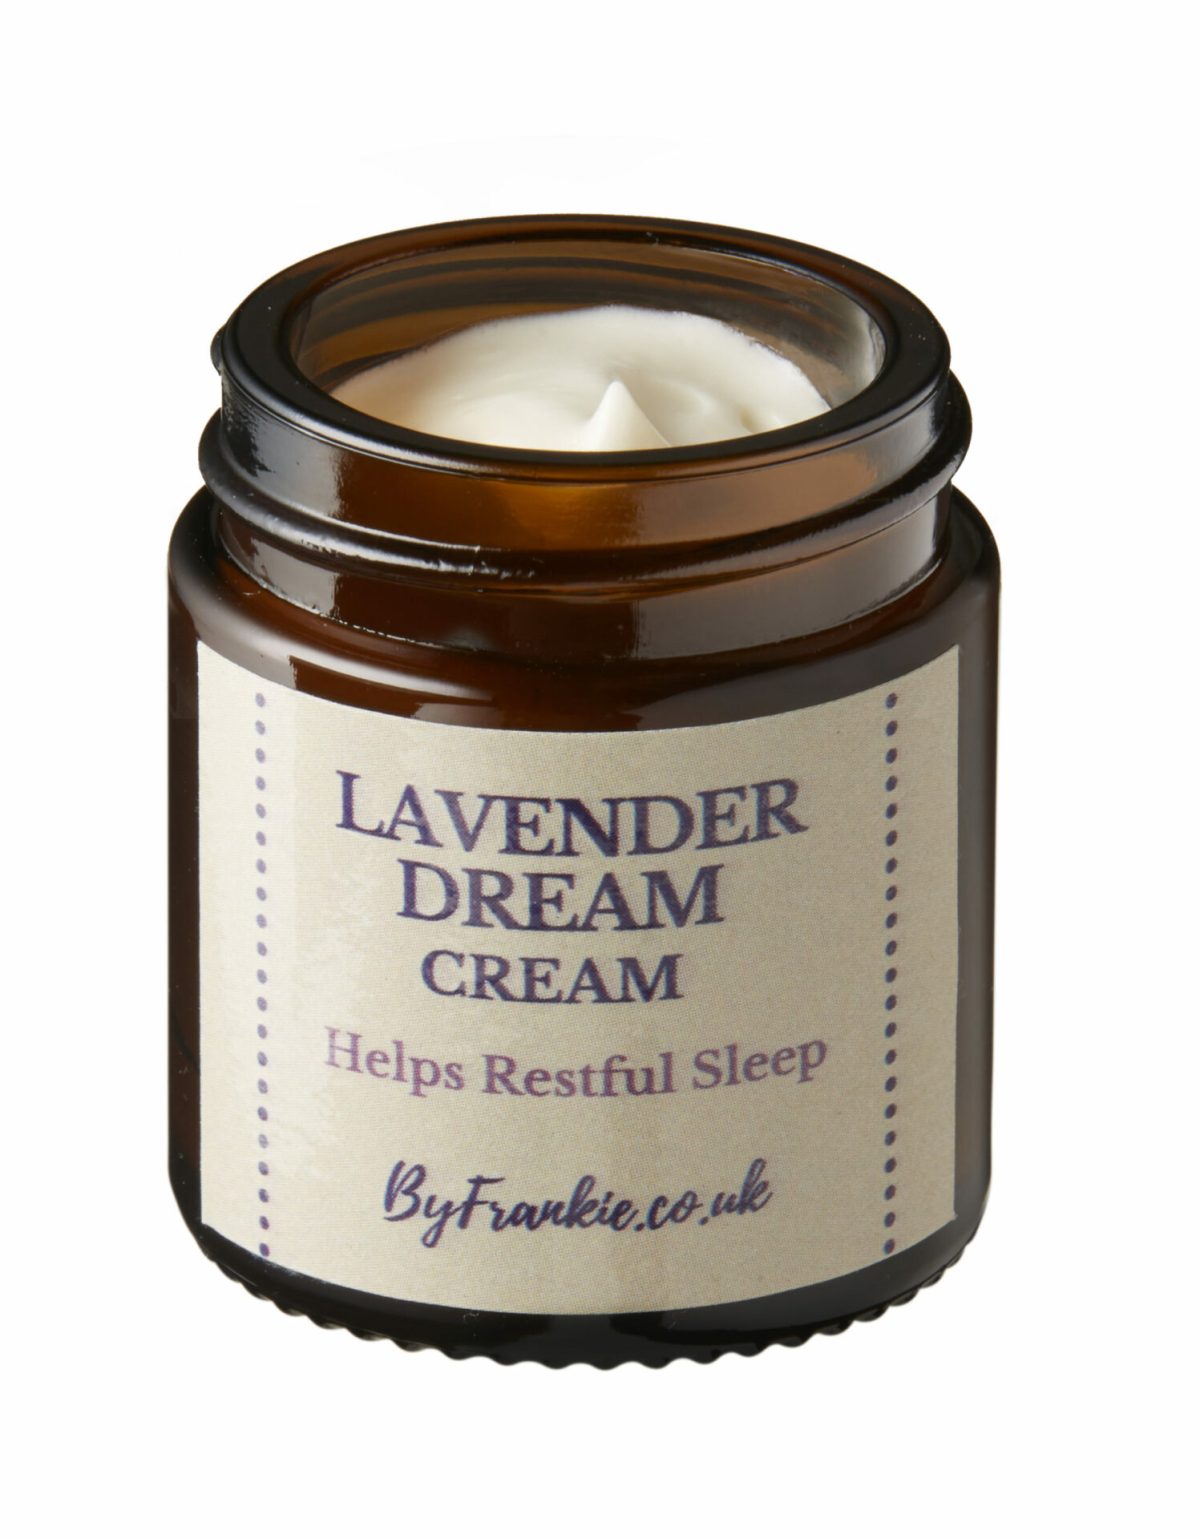 Lavender Dreams Charity Soap and Cream Set at Henley Circle Online Shop